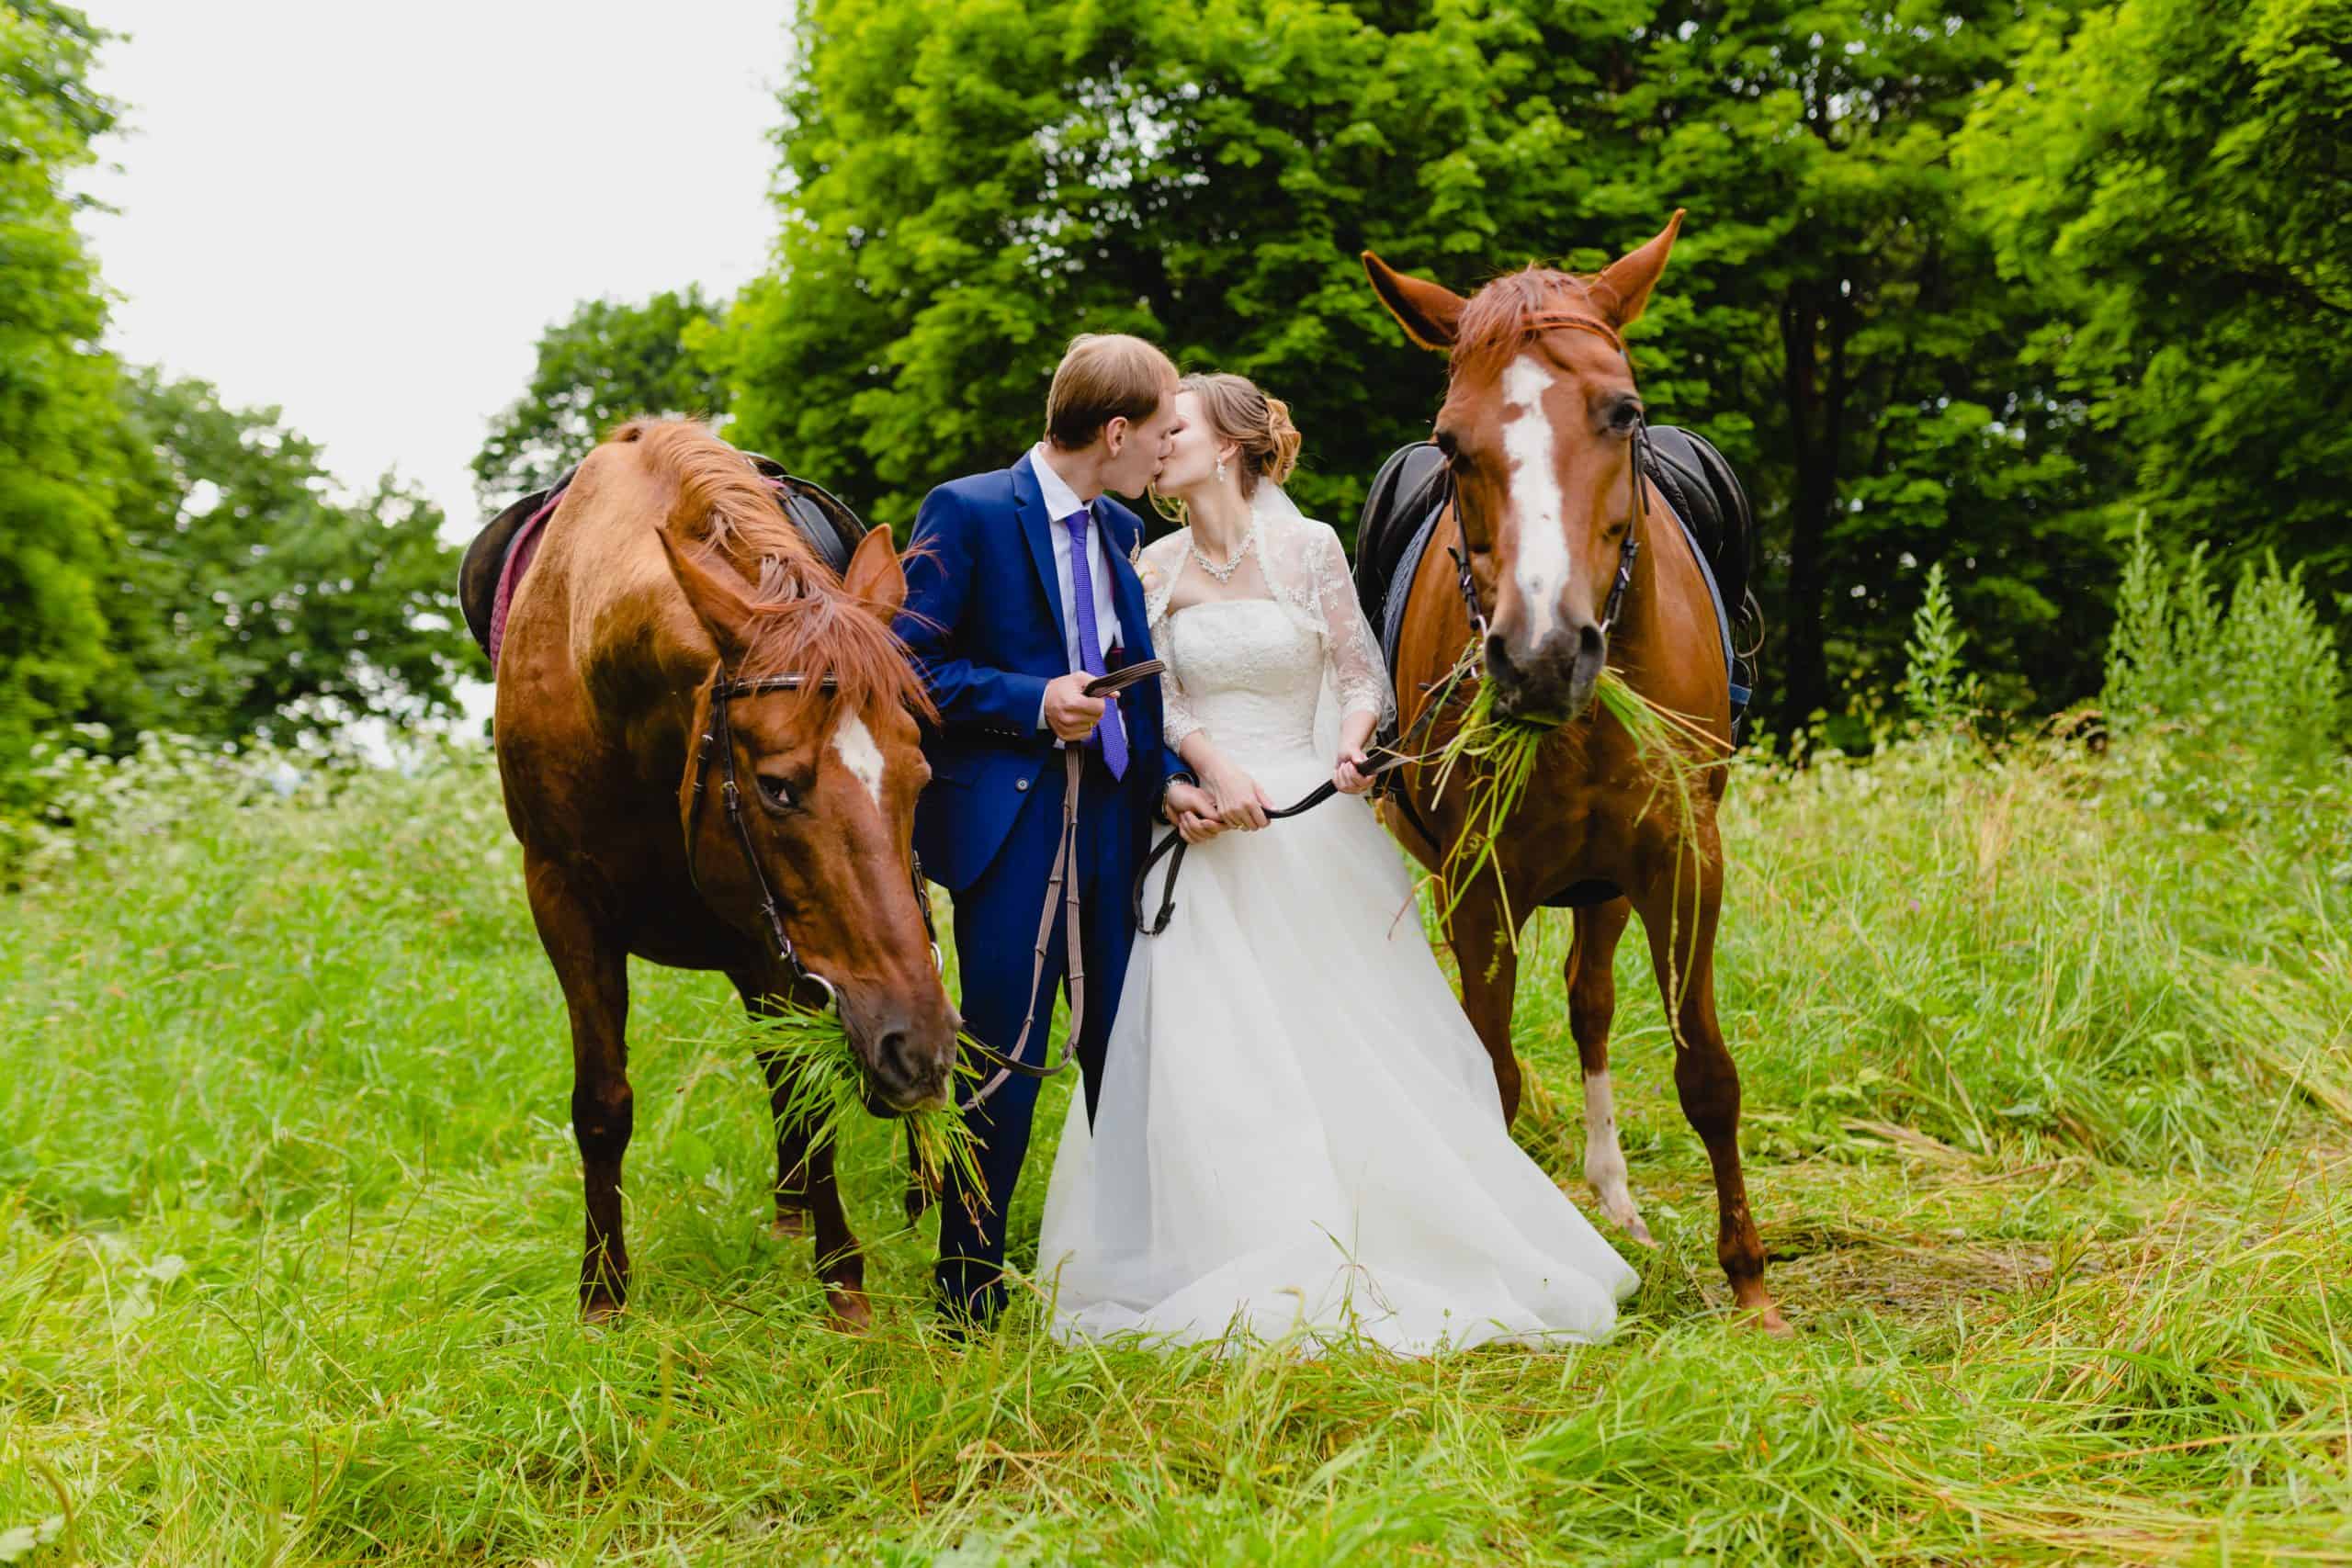 Beautiful newlyweds with two horses in the park on the background of a summer nature